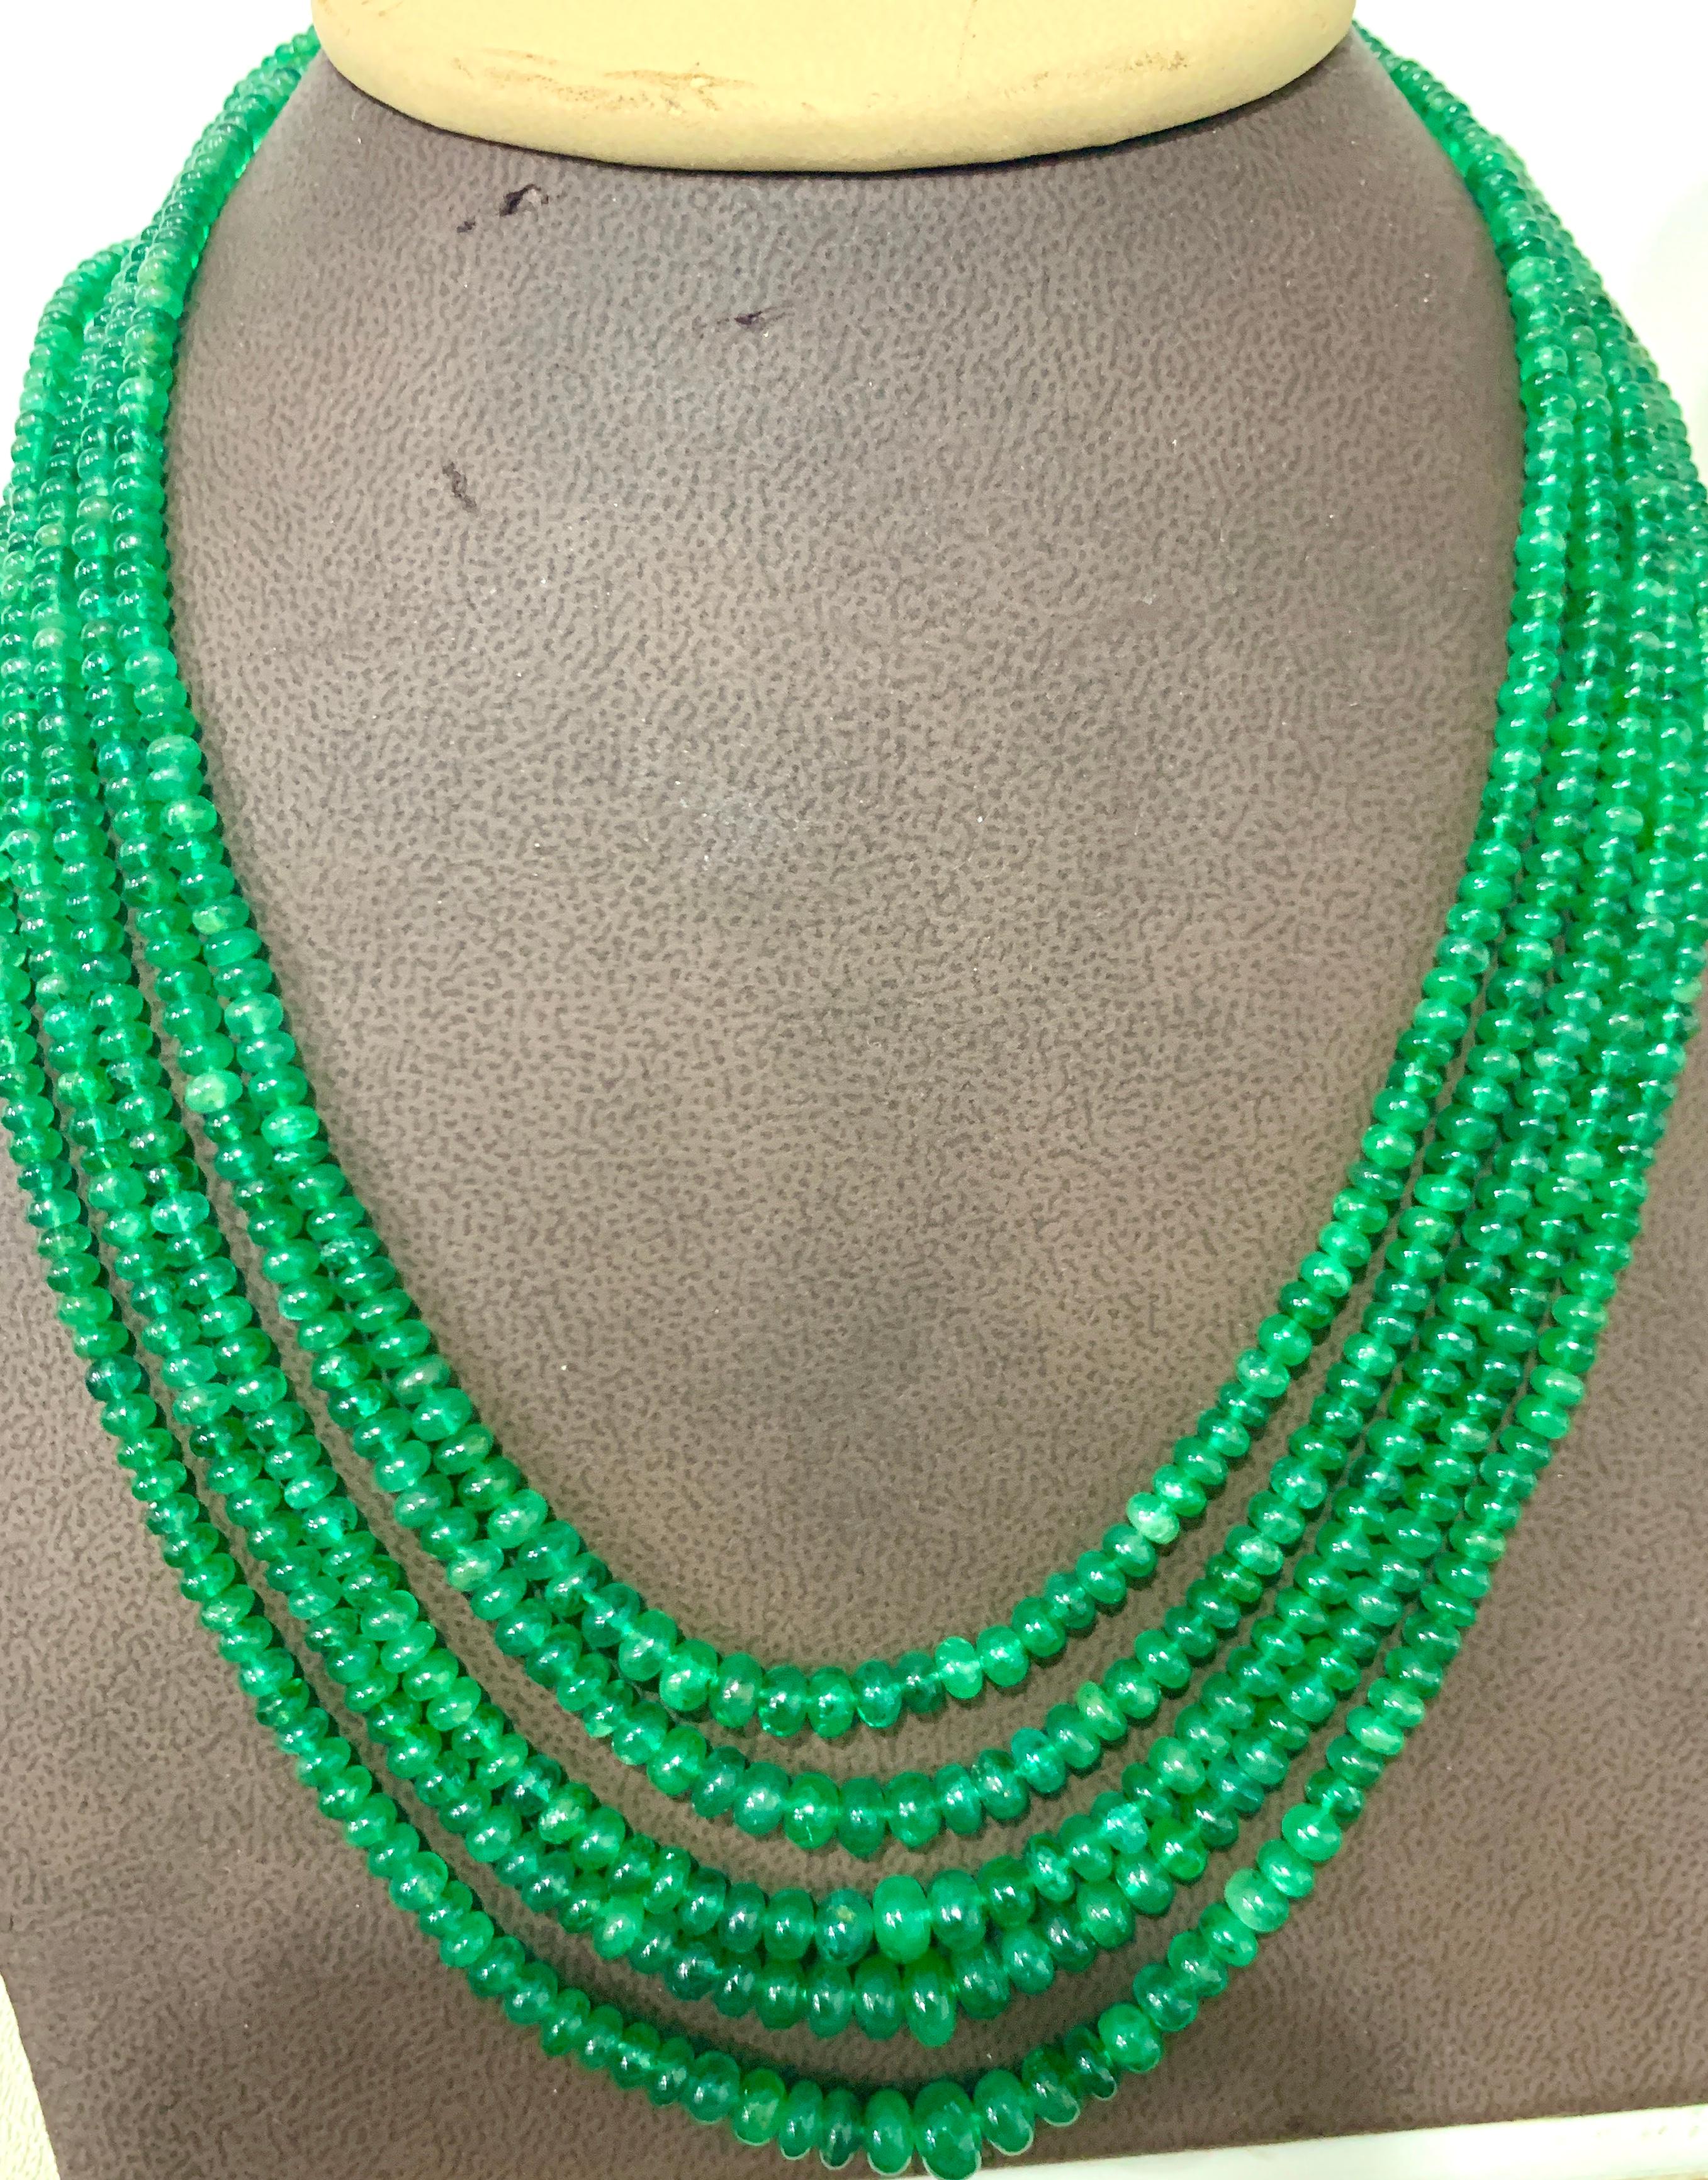 247  Carats 5 Layer  natural Brazilian Emerald Bead Necklace Sterling Silver Clasp
This spectacular Necklace   consisting of approximately 247 Ct   of  Fine Emerald Beads  .
A magnificent emerald bead necklace featuring a large number of Graduating